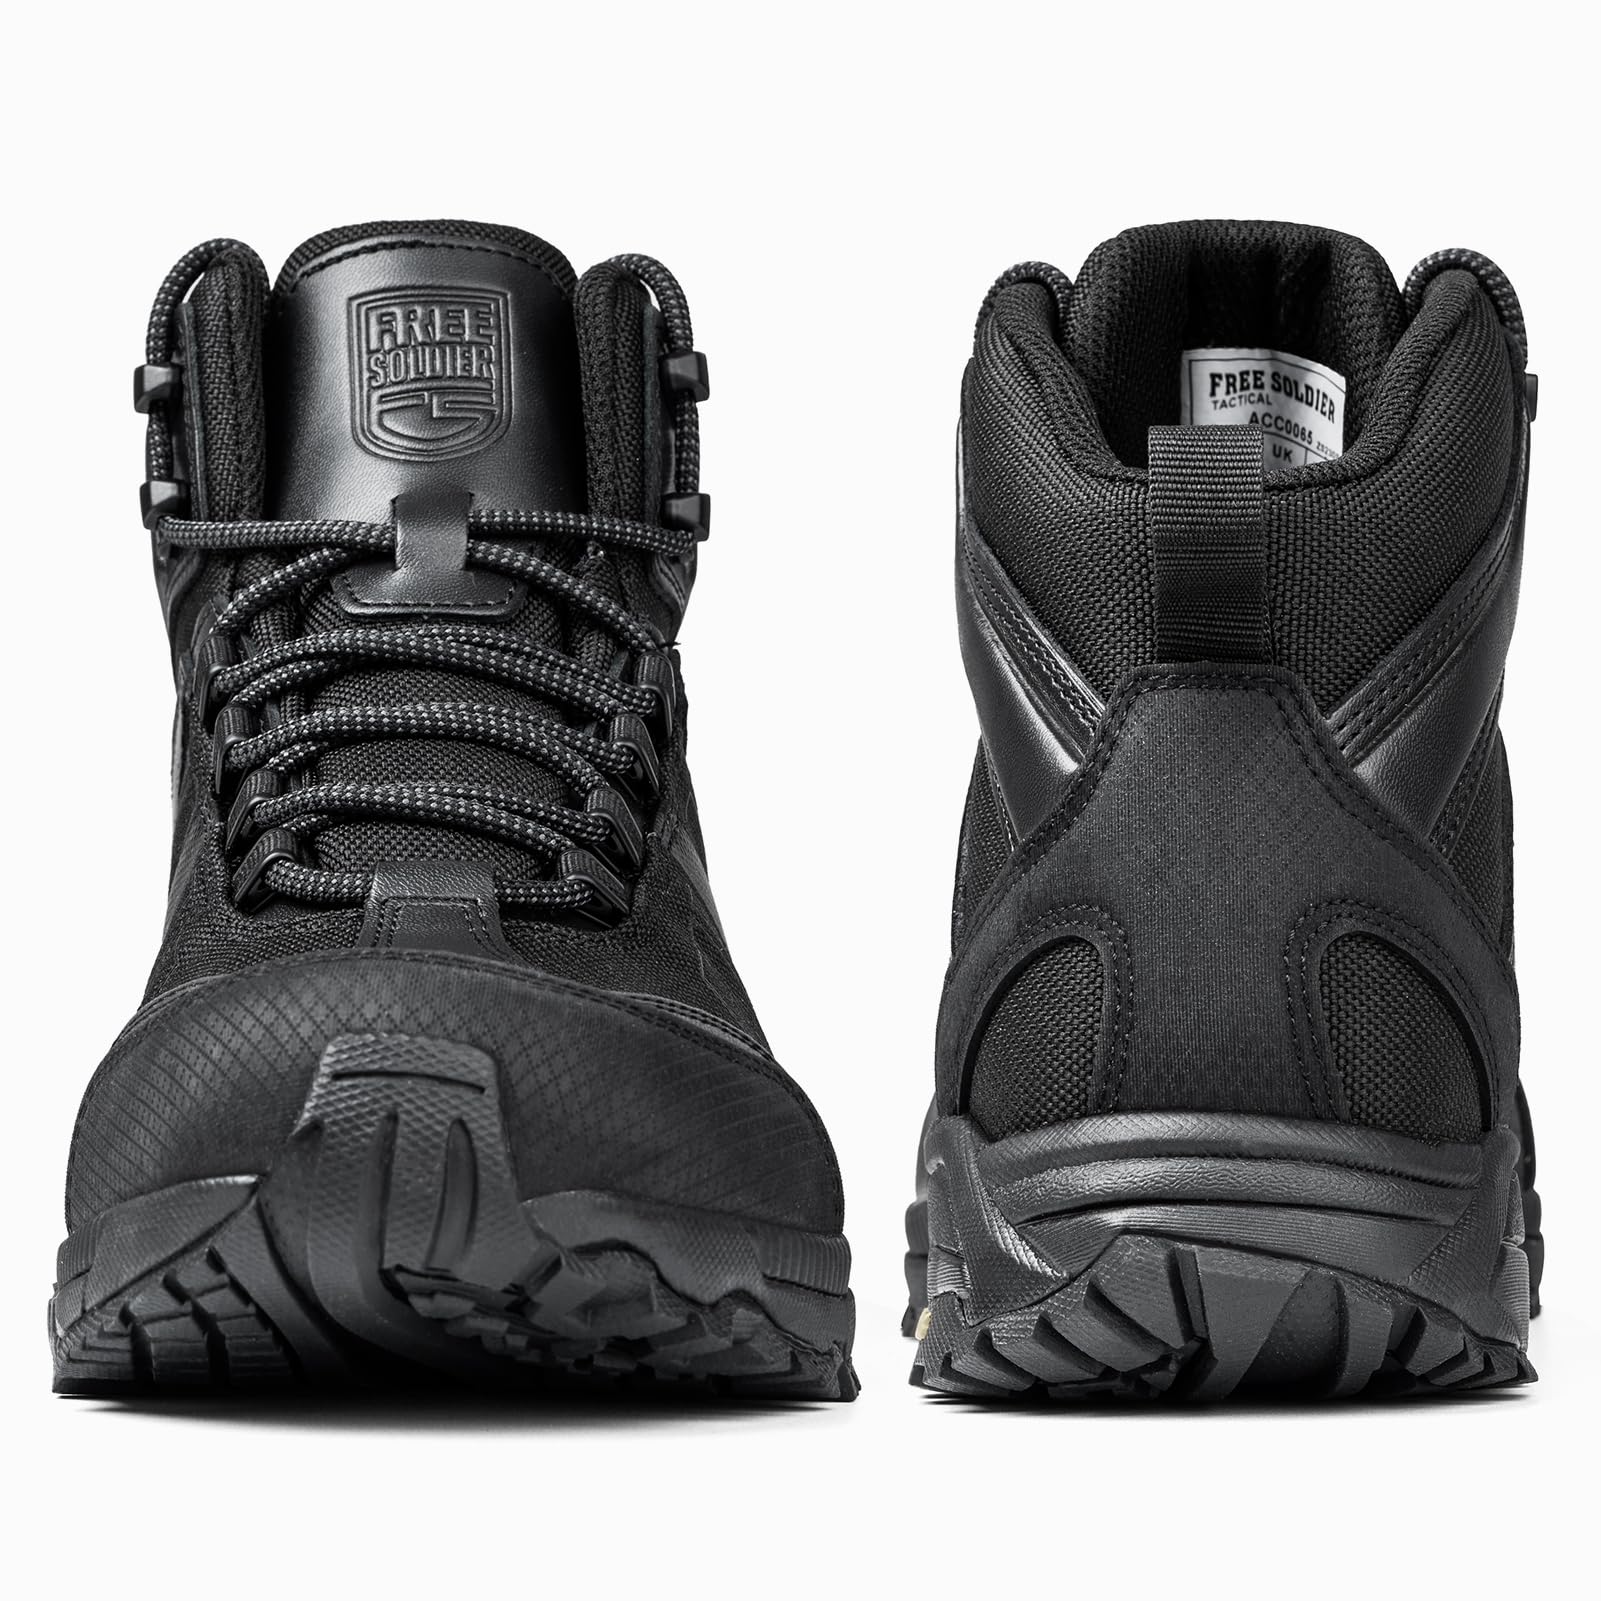 Black Panther Low-Cut Military Tactical Boots